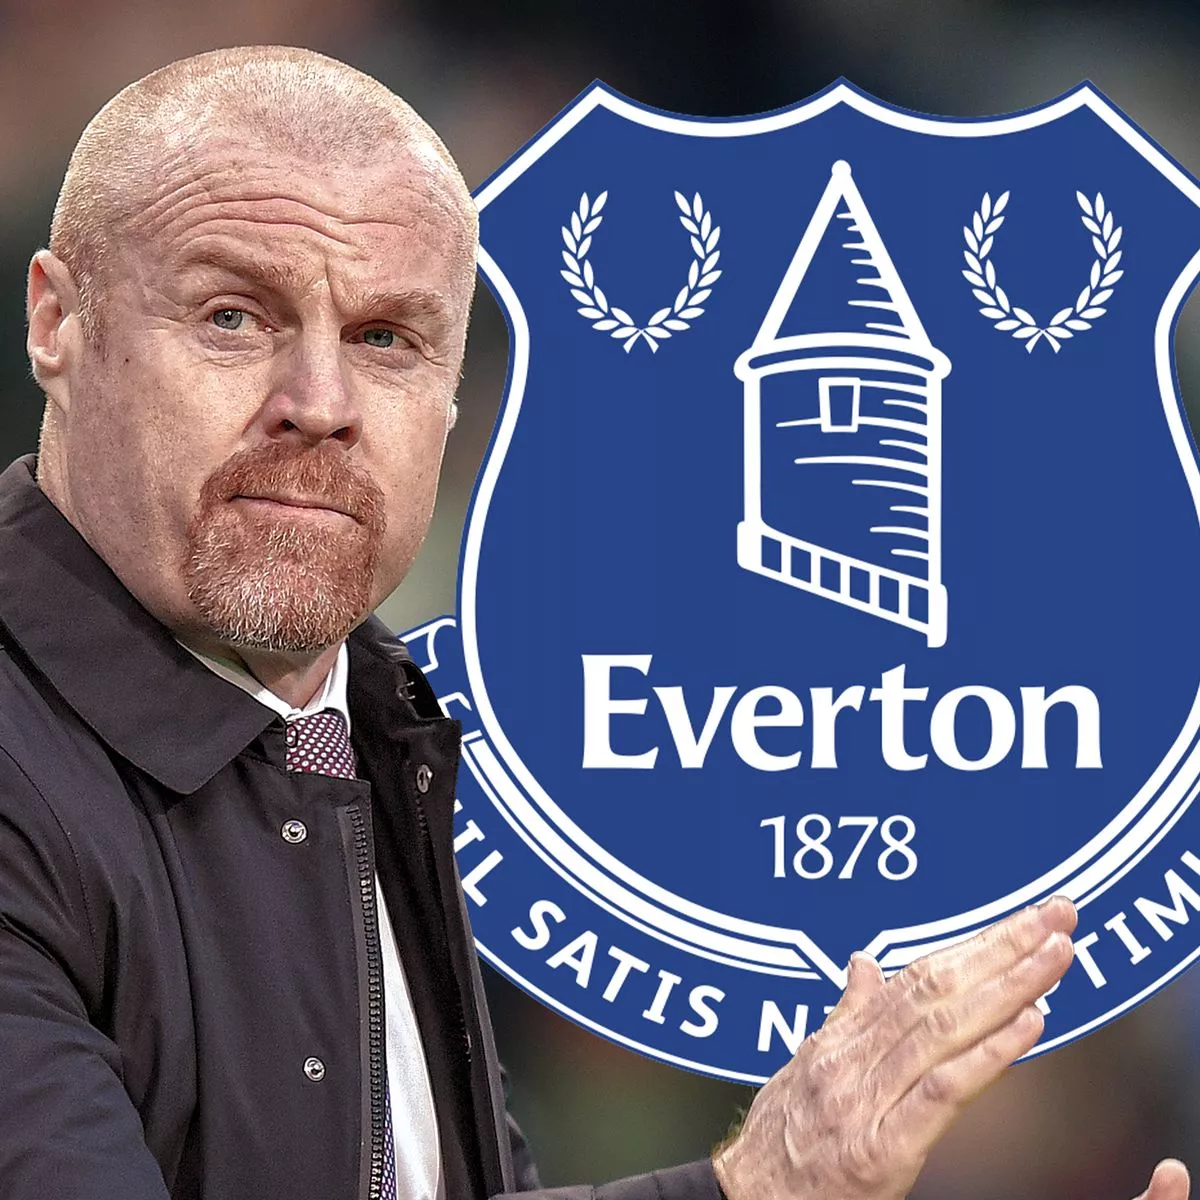 BBC NEWS: Everton The ‘top’ manager ‘would love’ to coach at Goodison one day